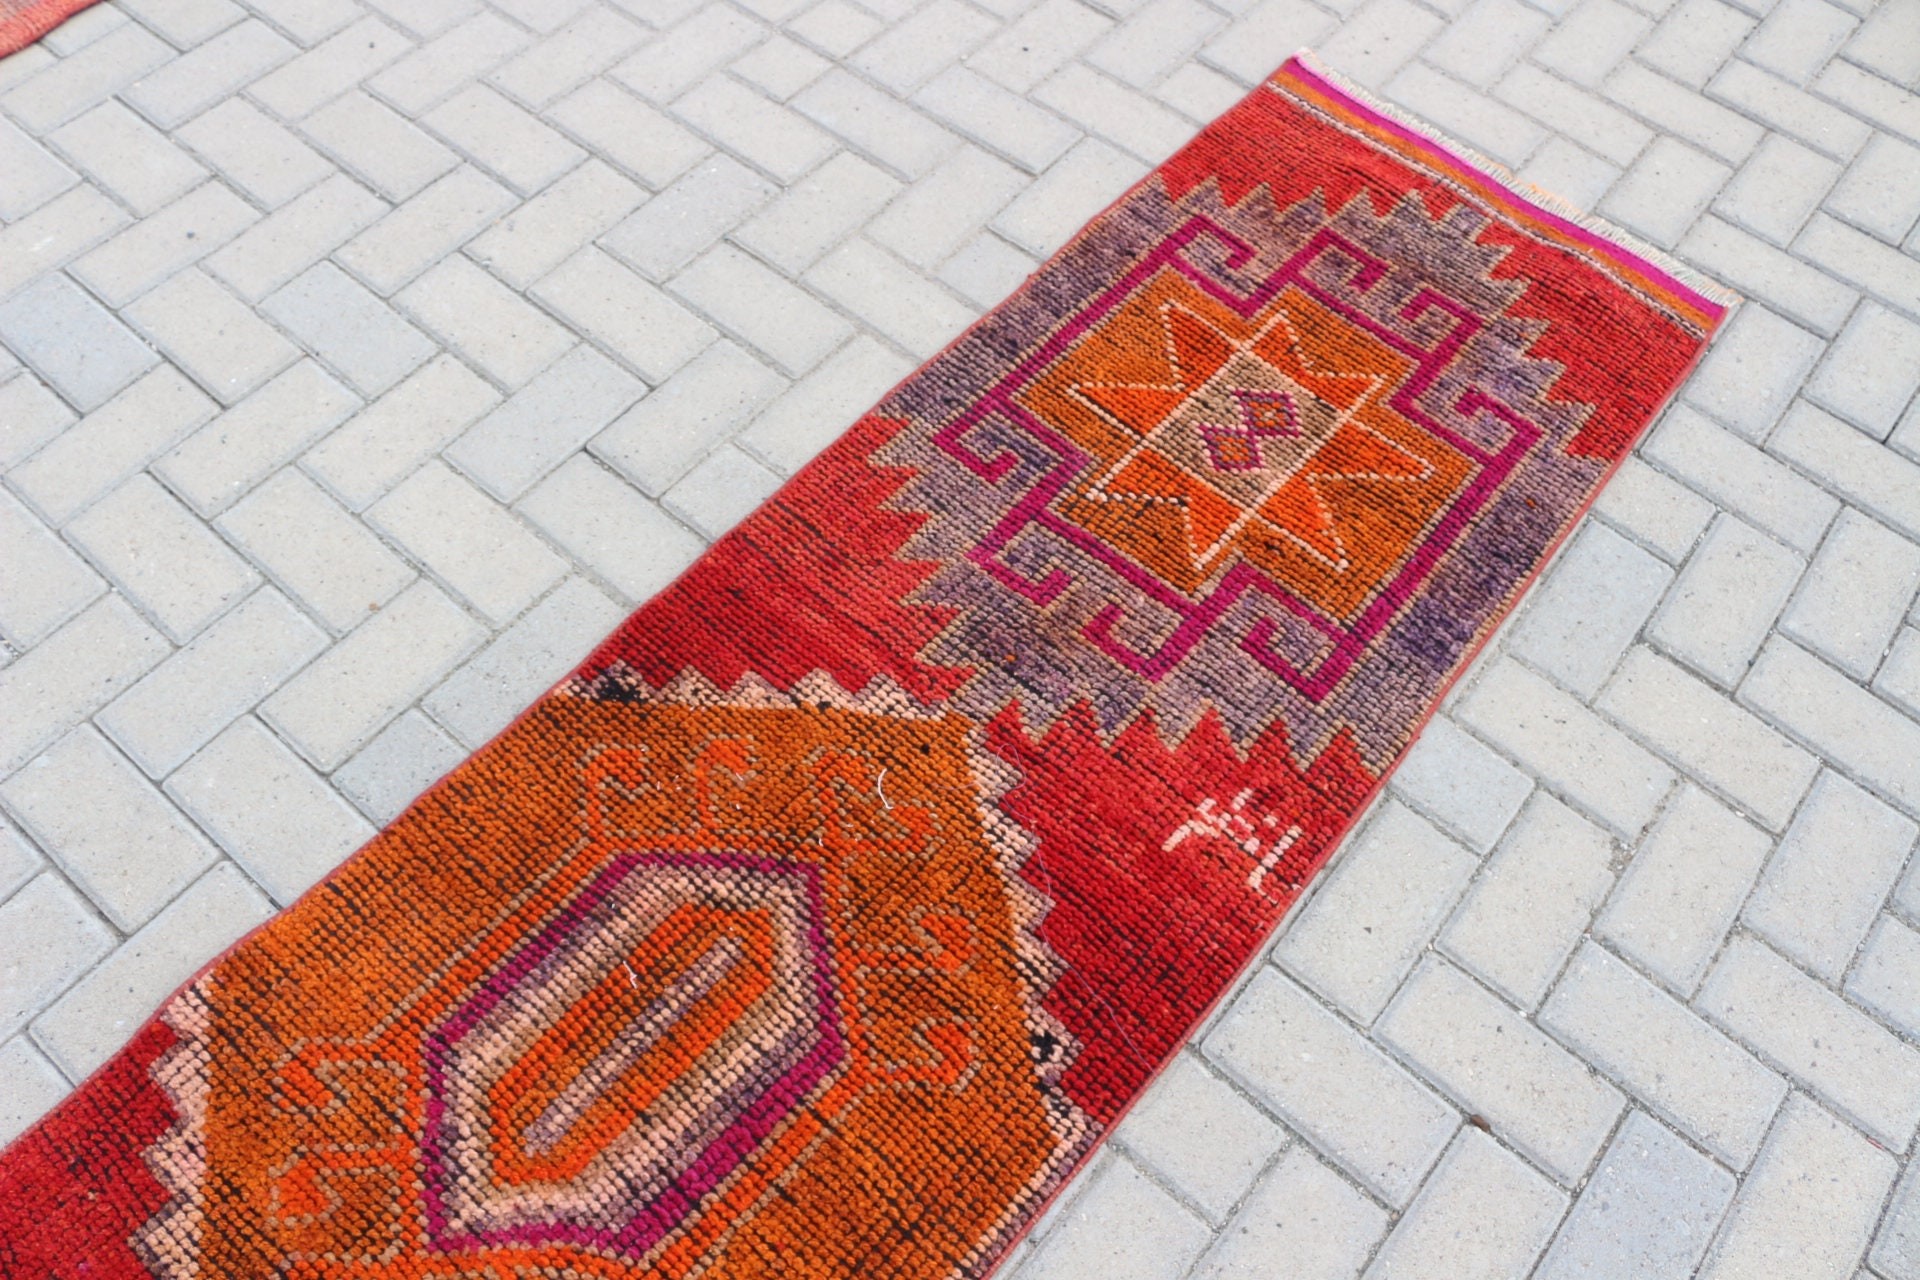 Hallway Rug, Stair Rugs, Vintage Rugs, Kitchen Rug, Red  2x12.1 ft Runner Rug, Rugs for Kitchen, Turkish Rug, Oushak Rugs